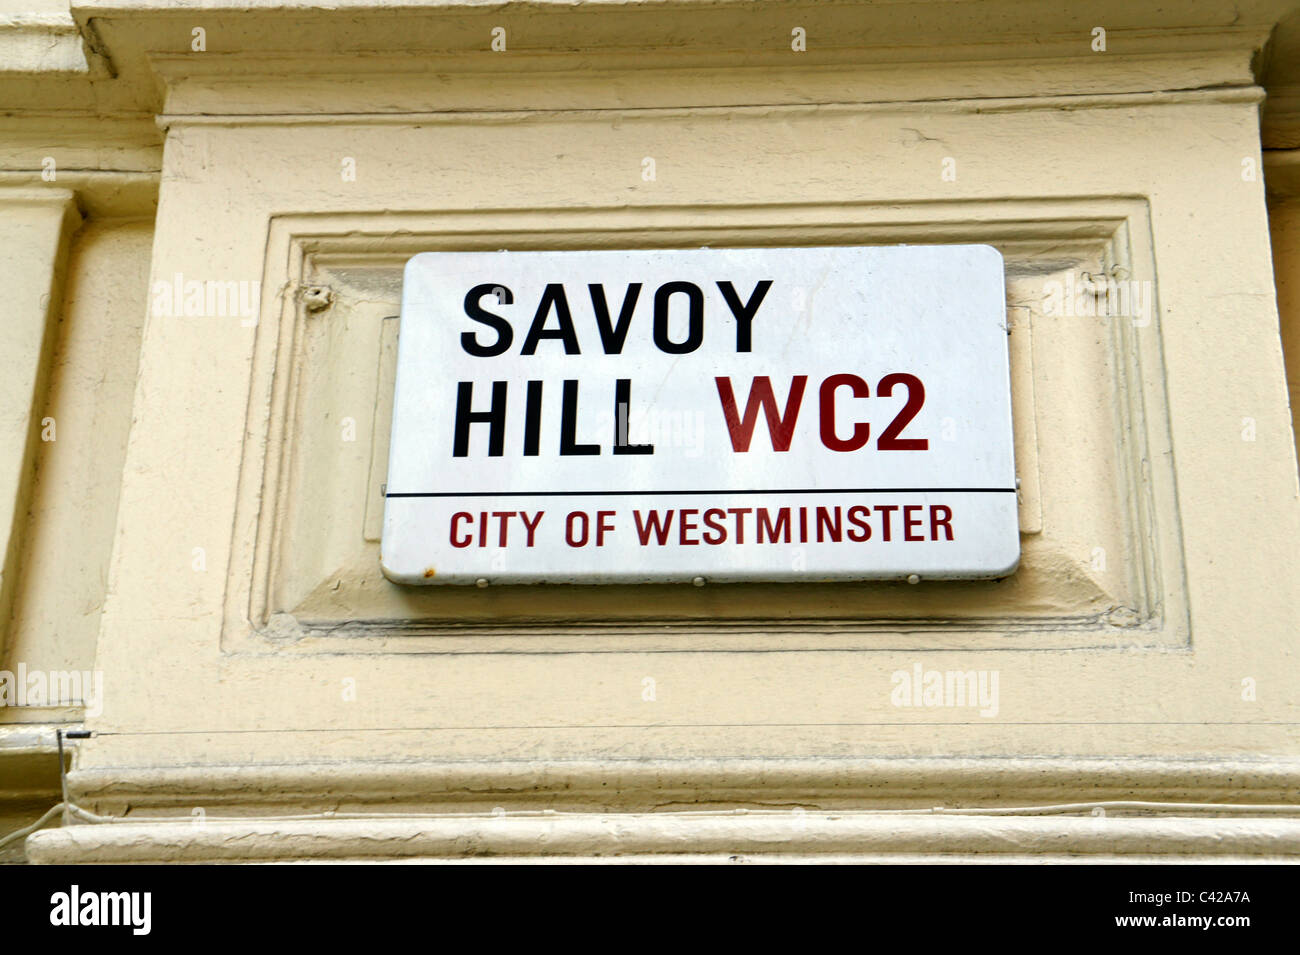 Savoy Hill WC2 City of Westminster cartello stradale Foto Stock